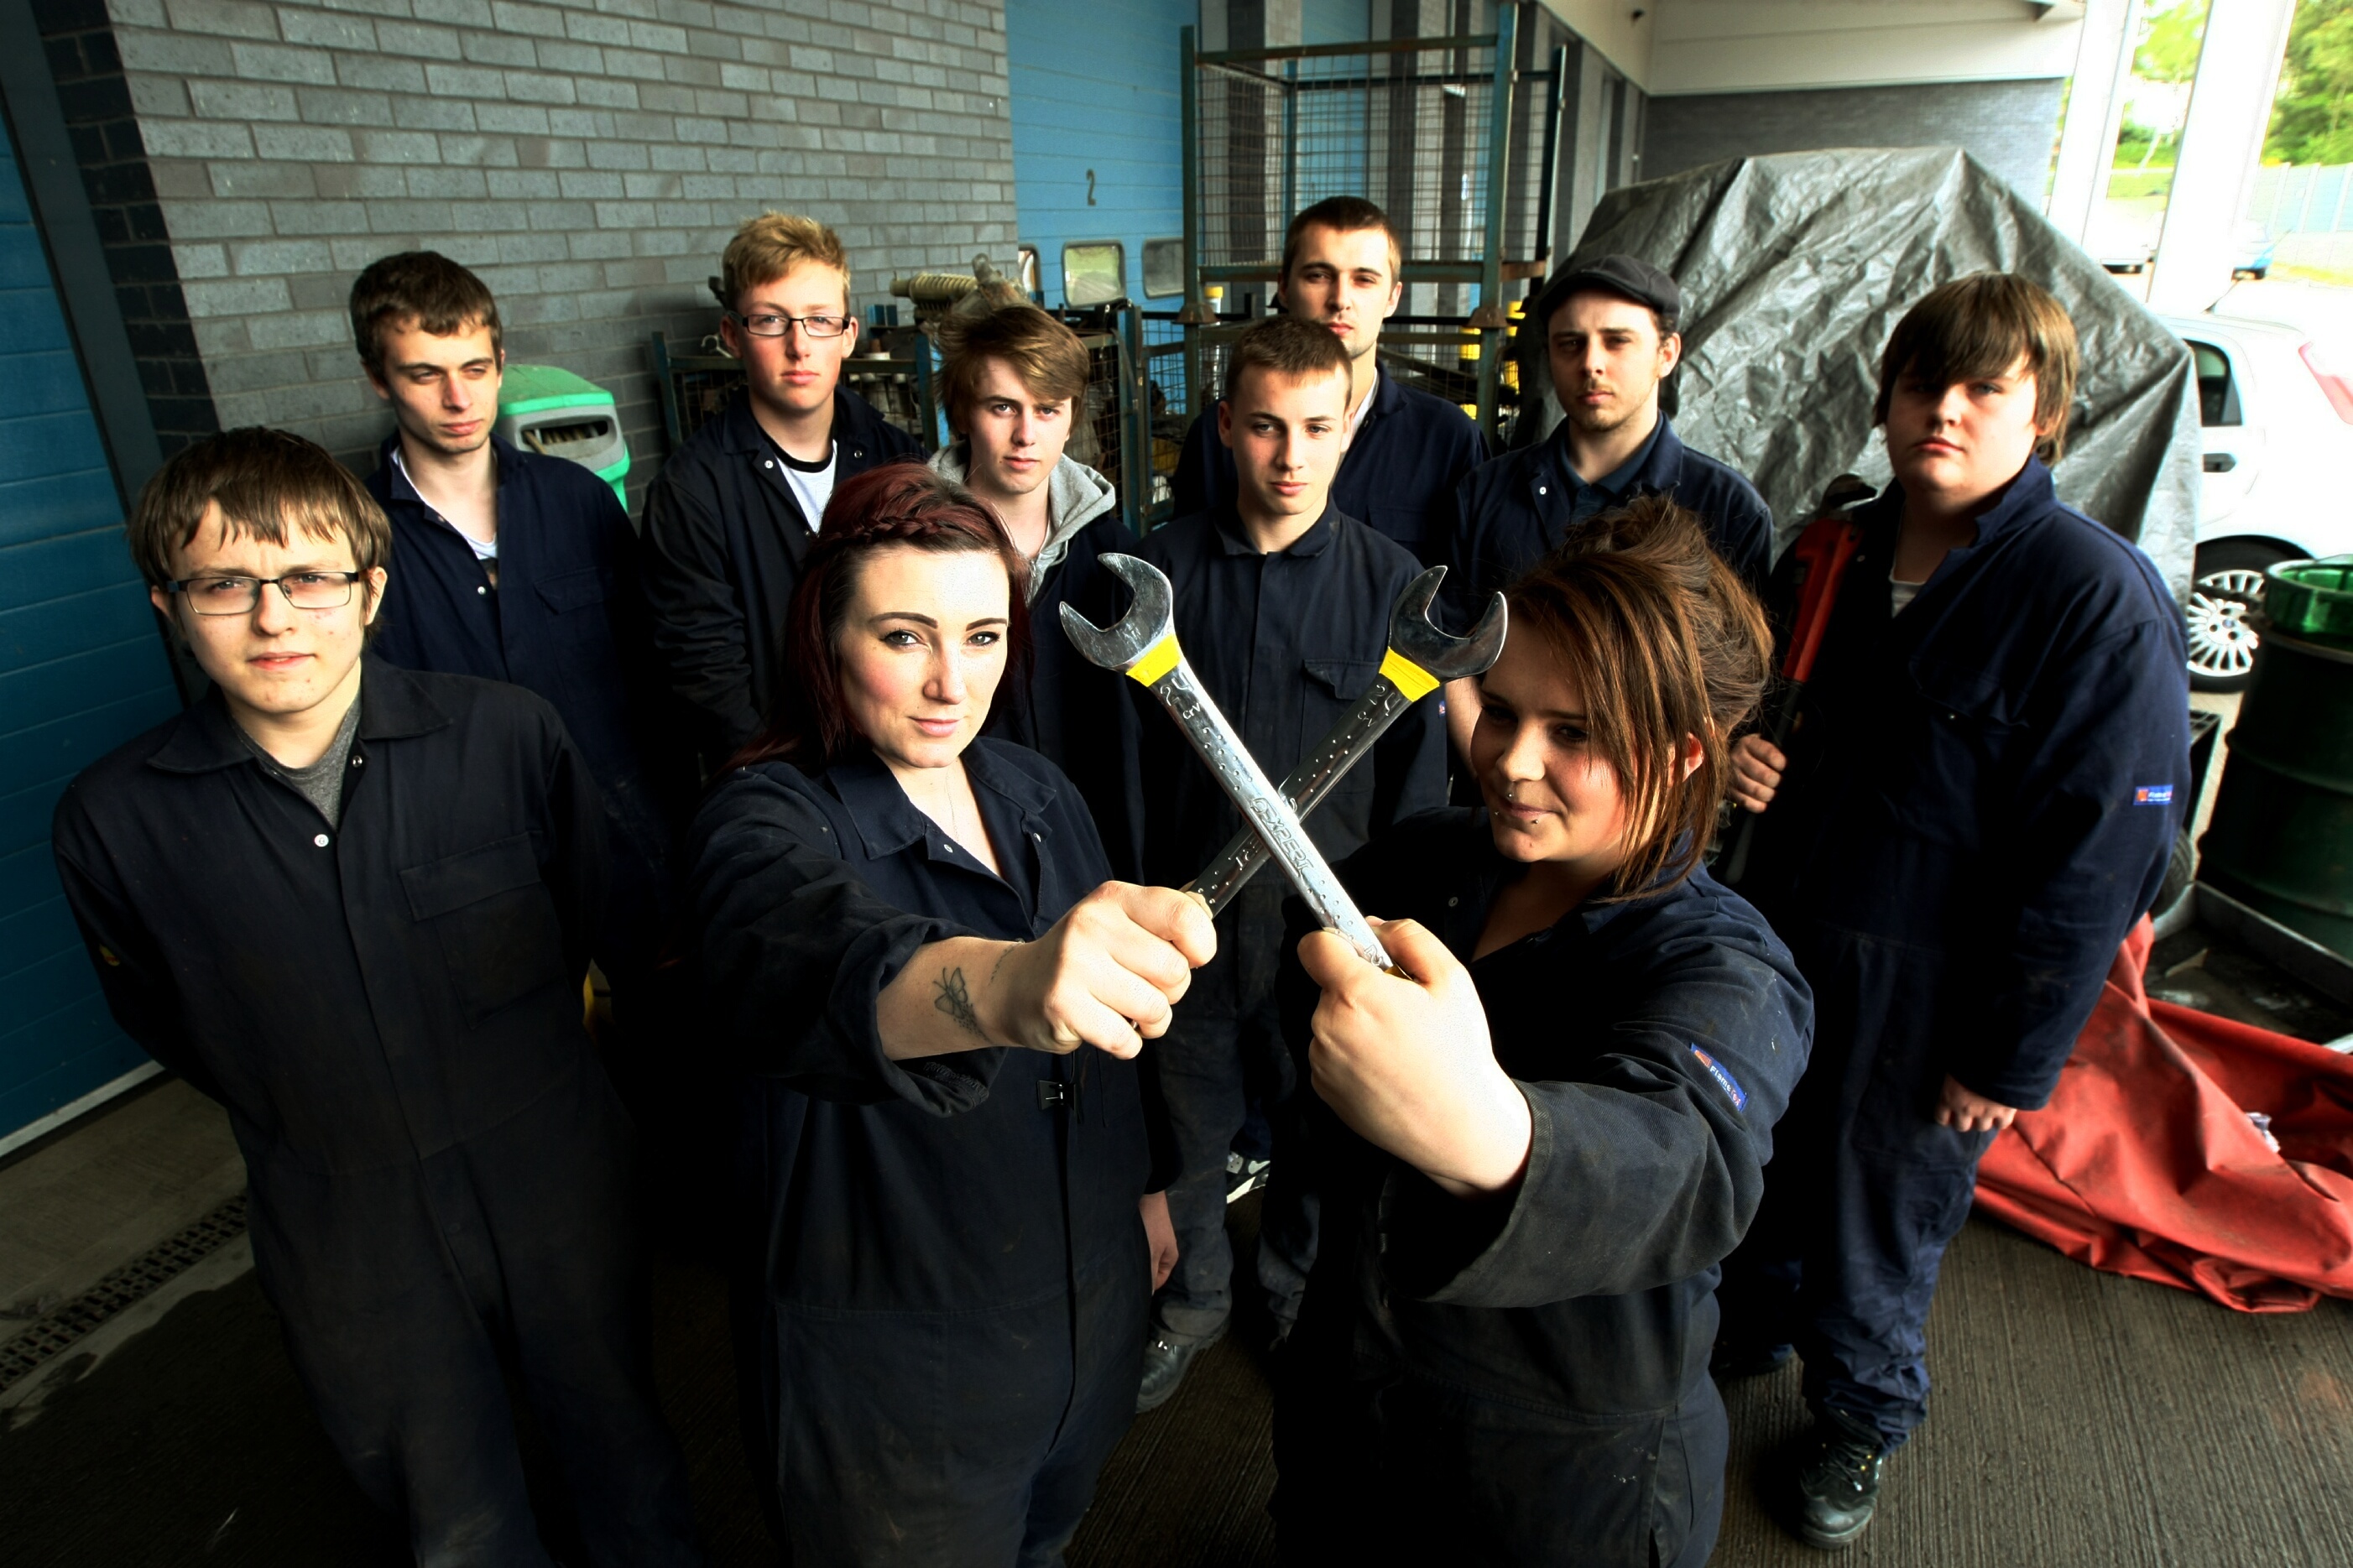 Some of the automotive maintenance students who have signed the petition to save the course.